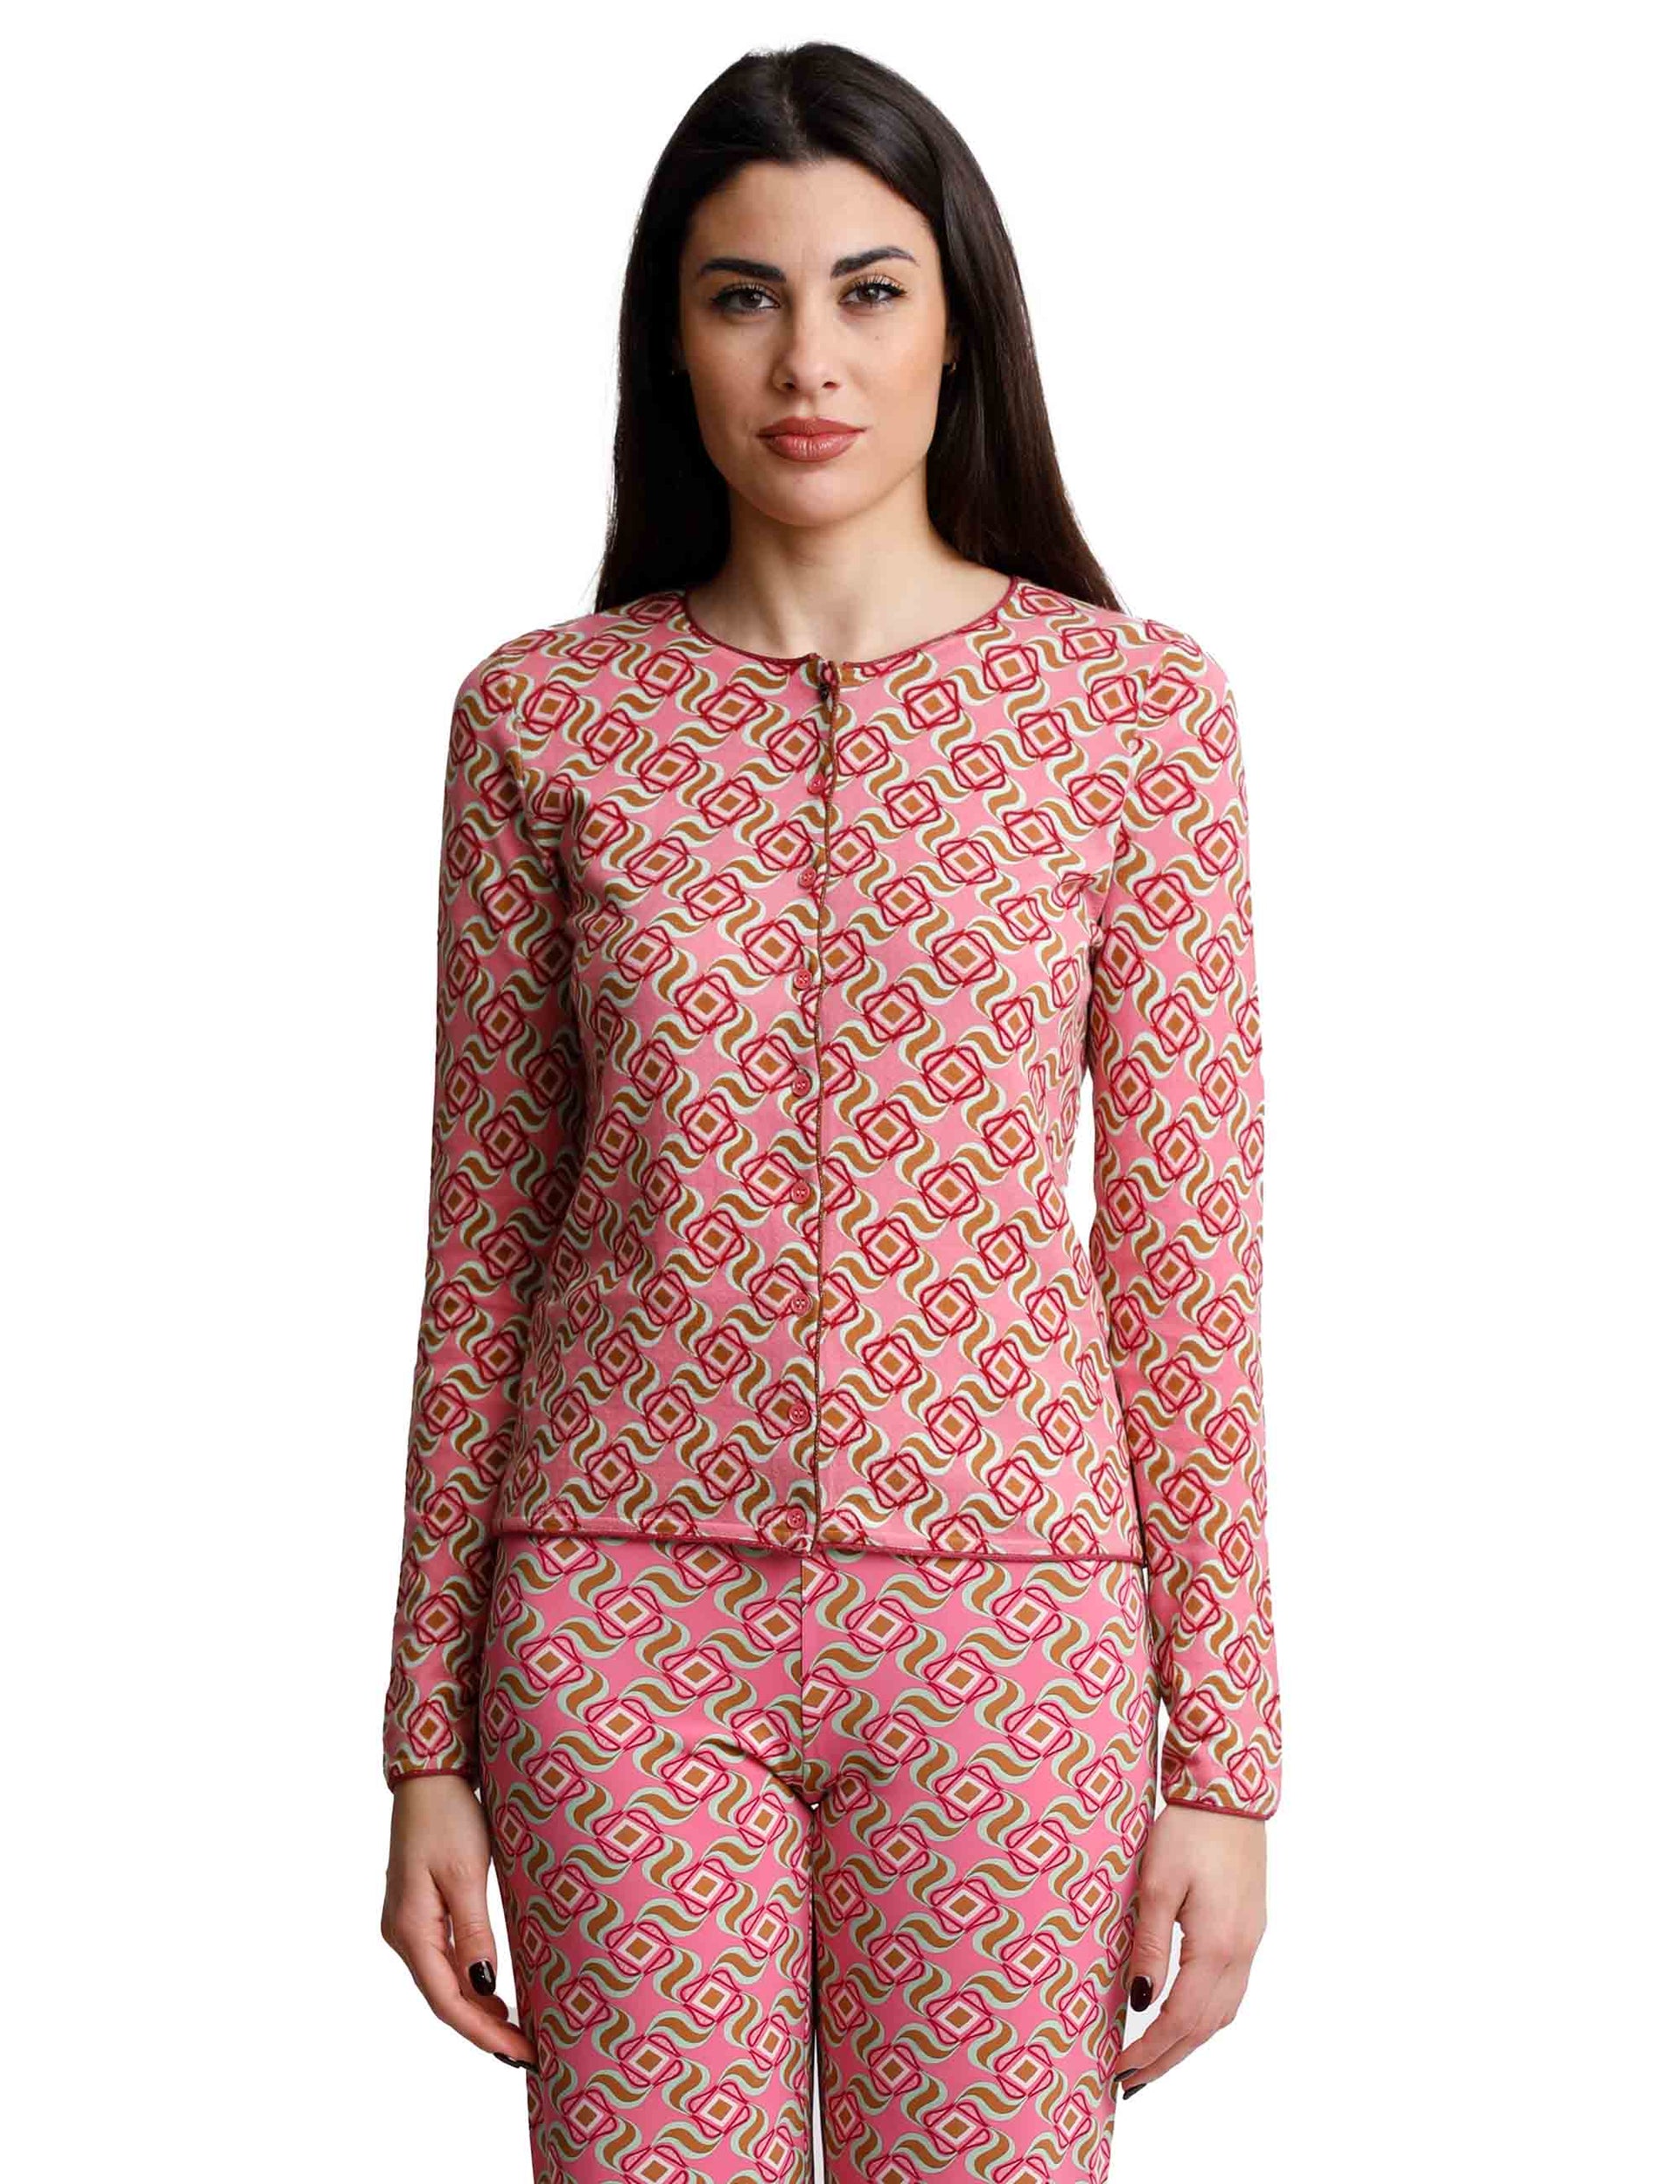 Printed women's cardigan sweaters in pink patterned cotton